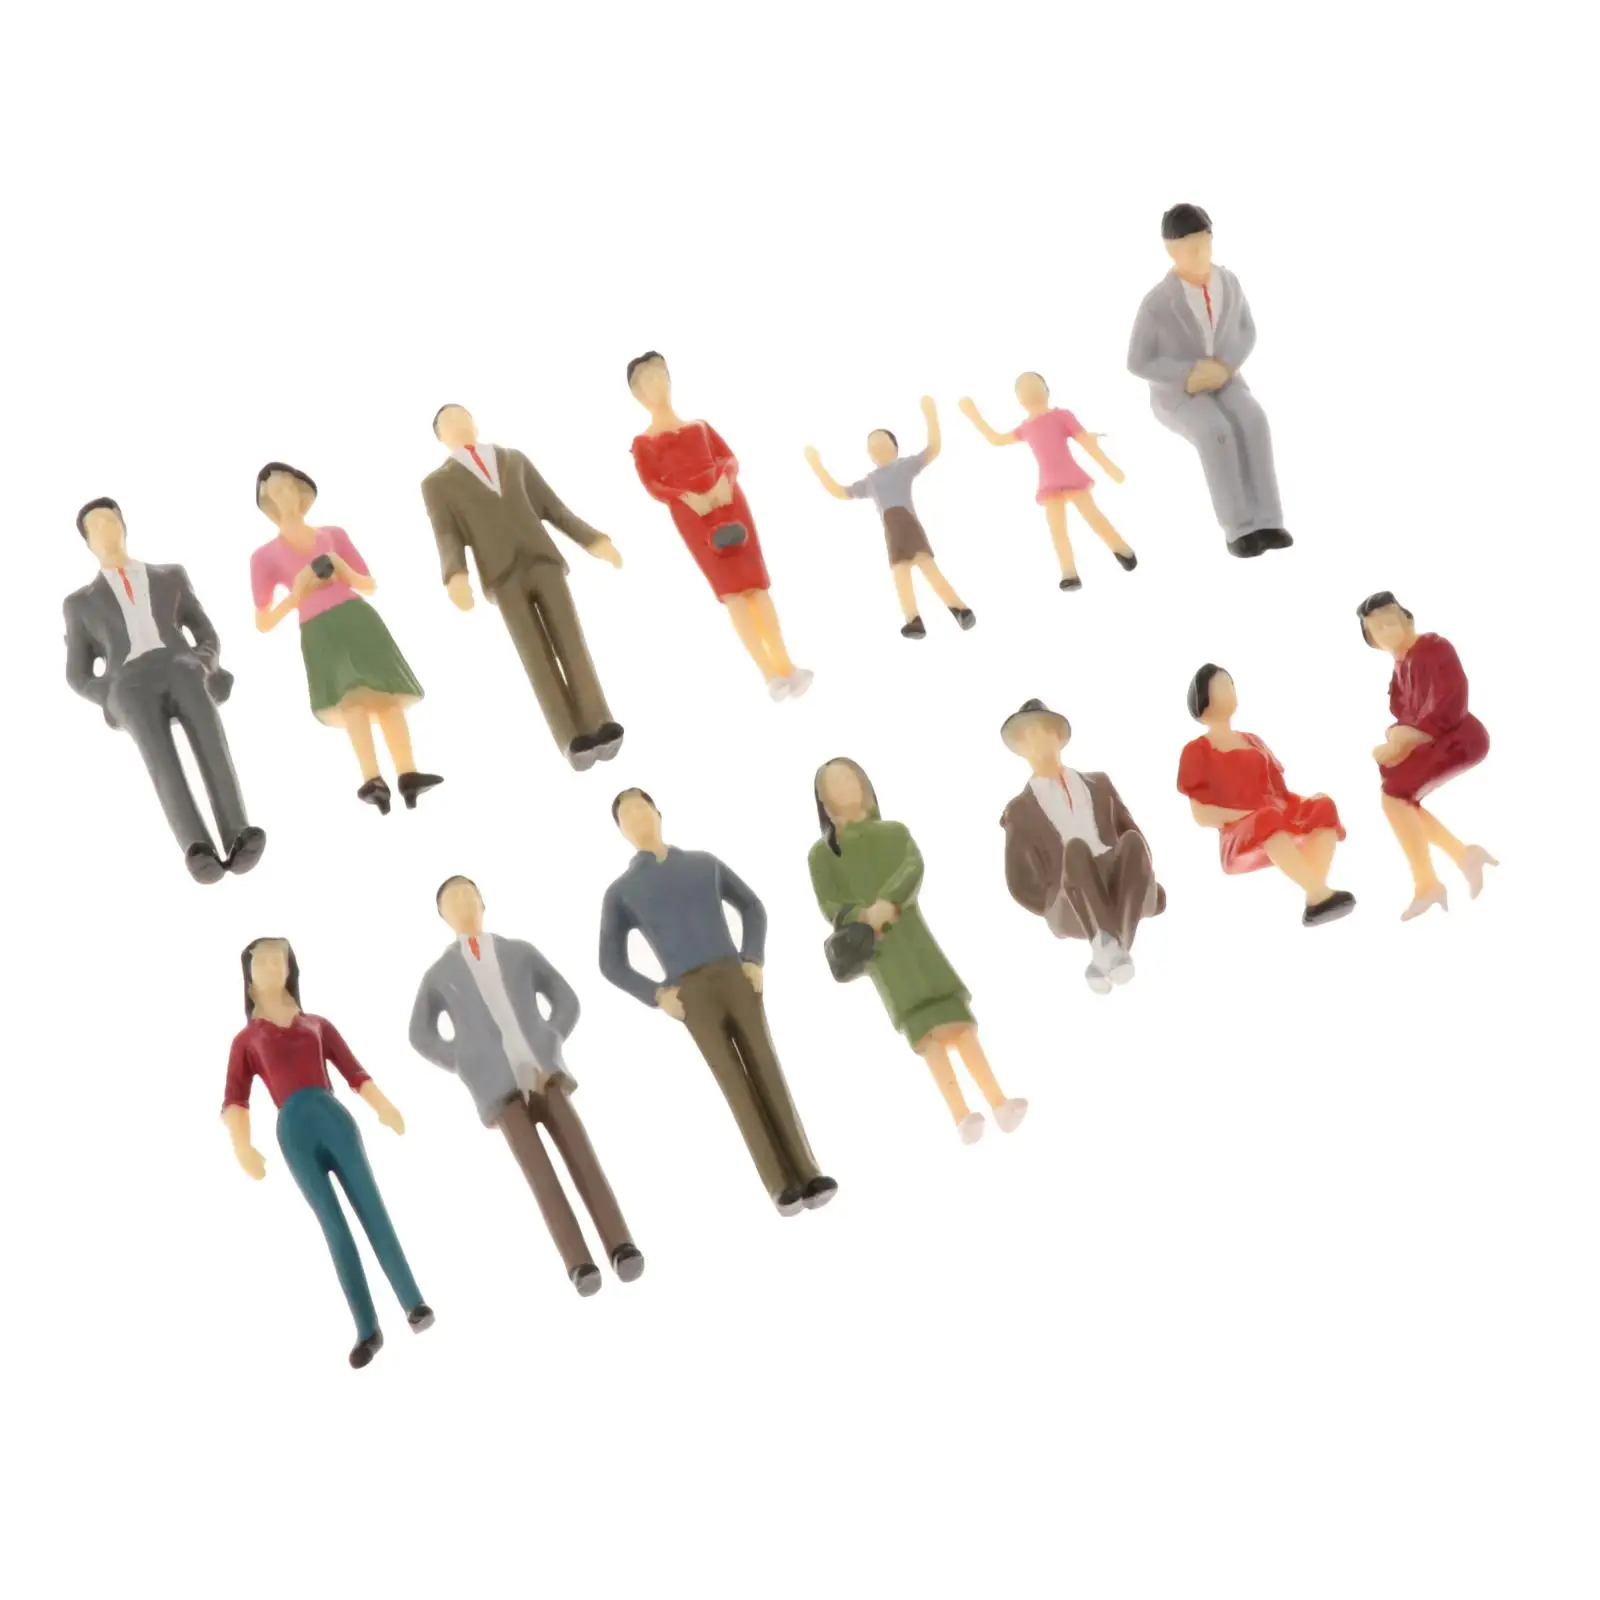 14 Pc Seated Standing People 1:30 Scale Figures Model Park Scenery DIY Multicolor Painted Various Poses